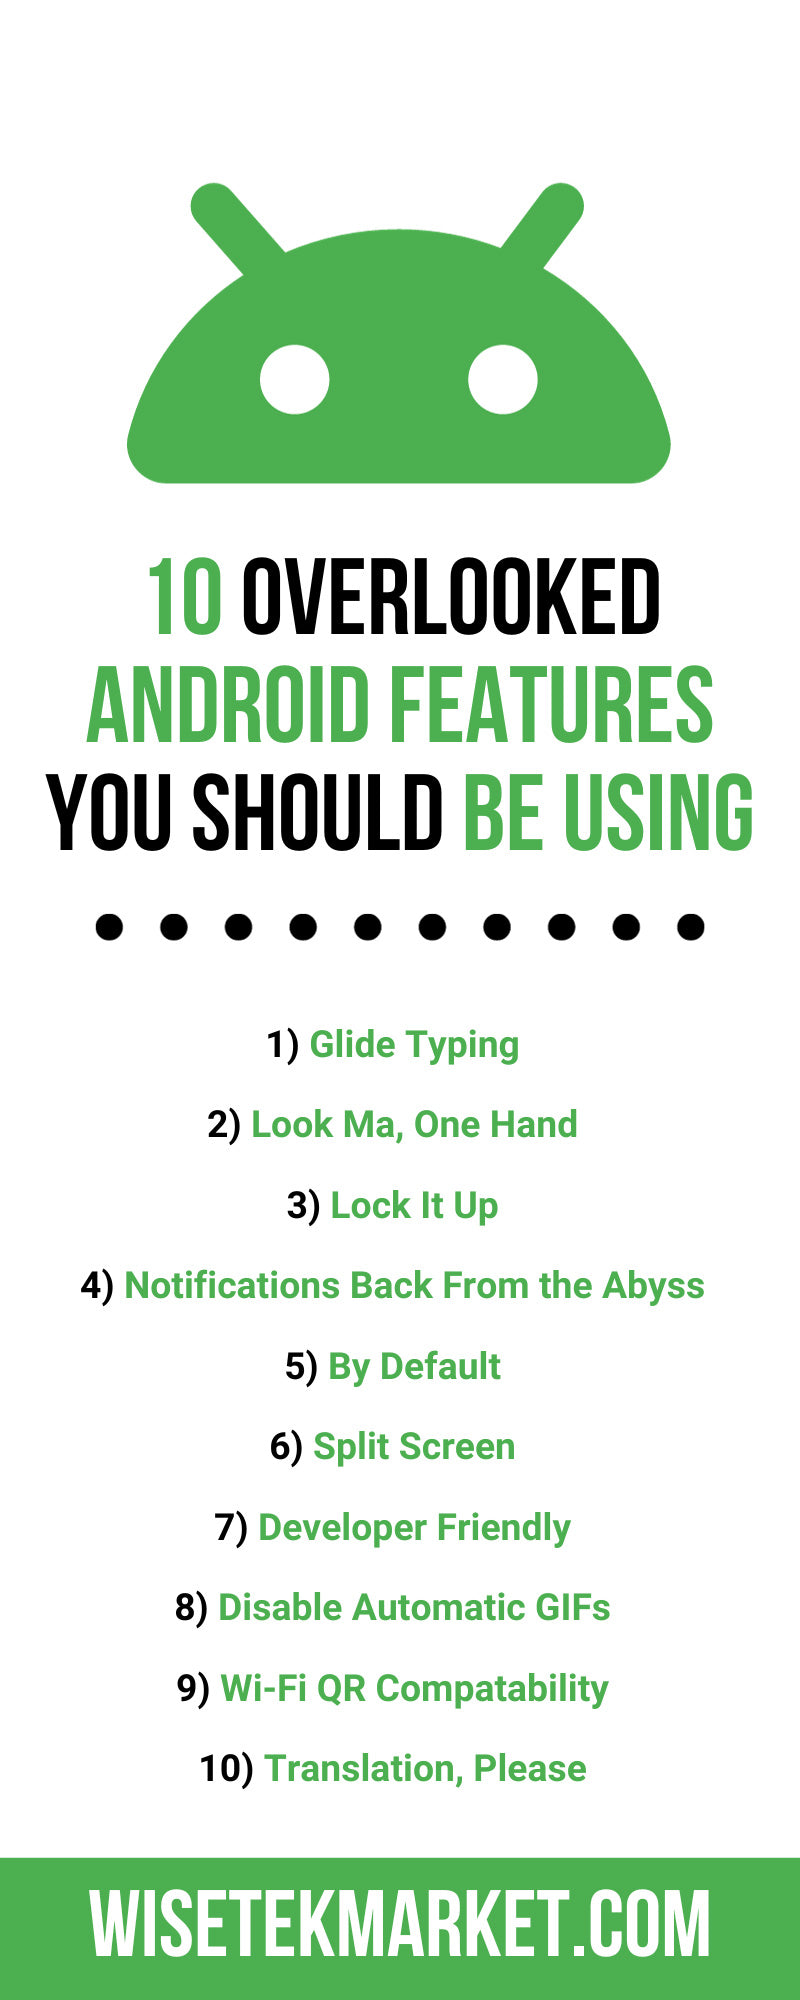 10 Overlooked Android Features You Should Be Using